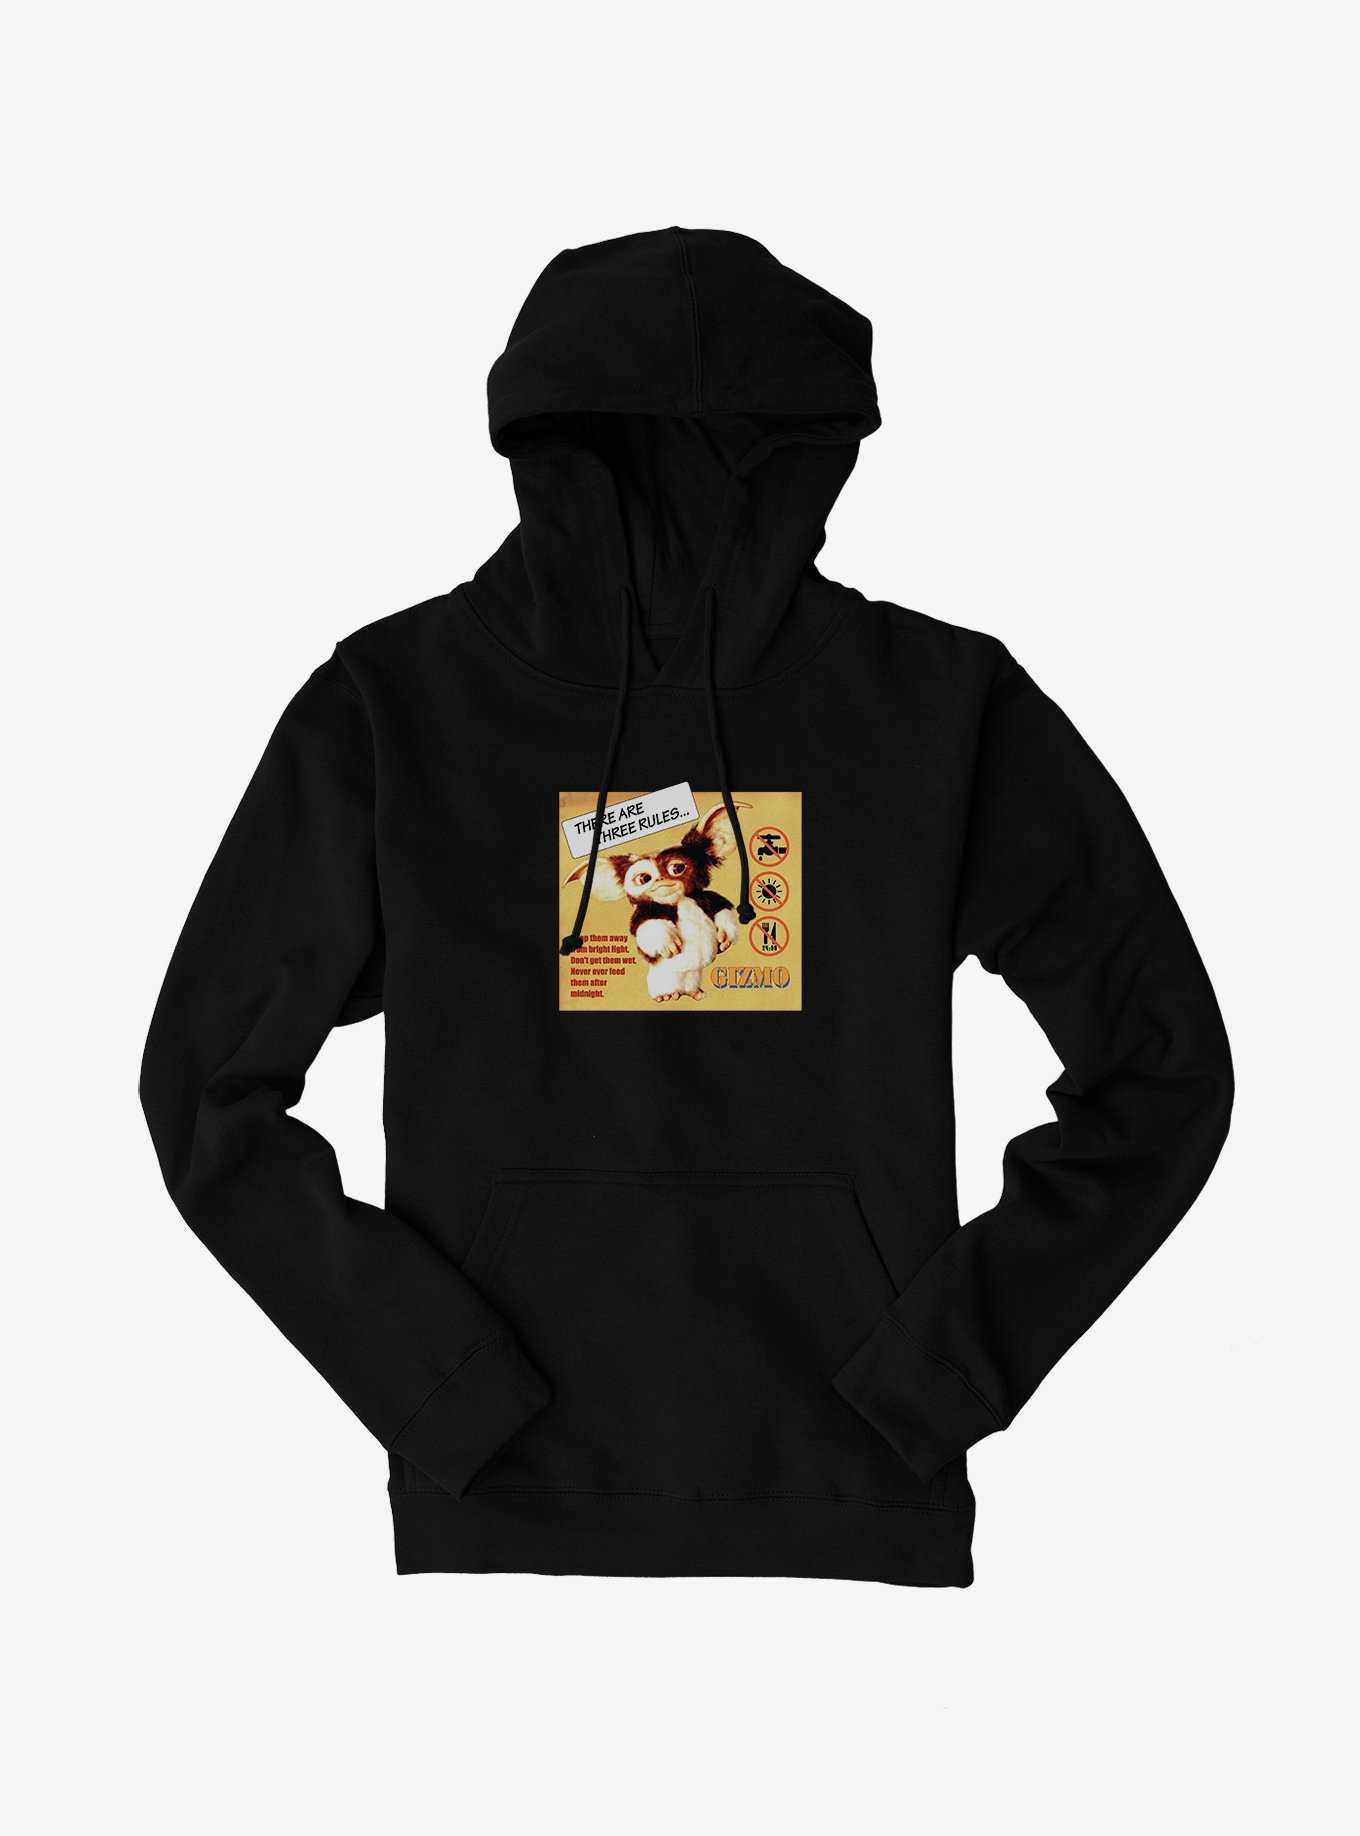 Gremlins There Are Three Rules... Hoodie, , hi-res